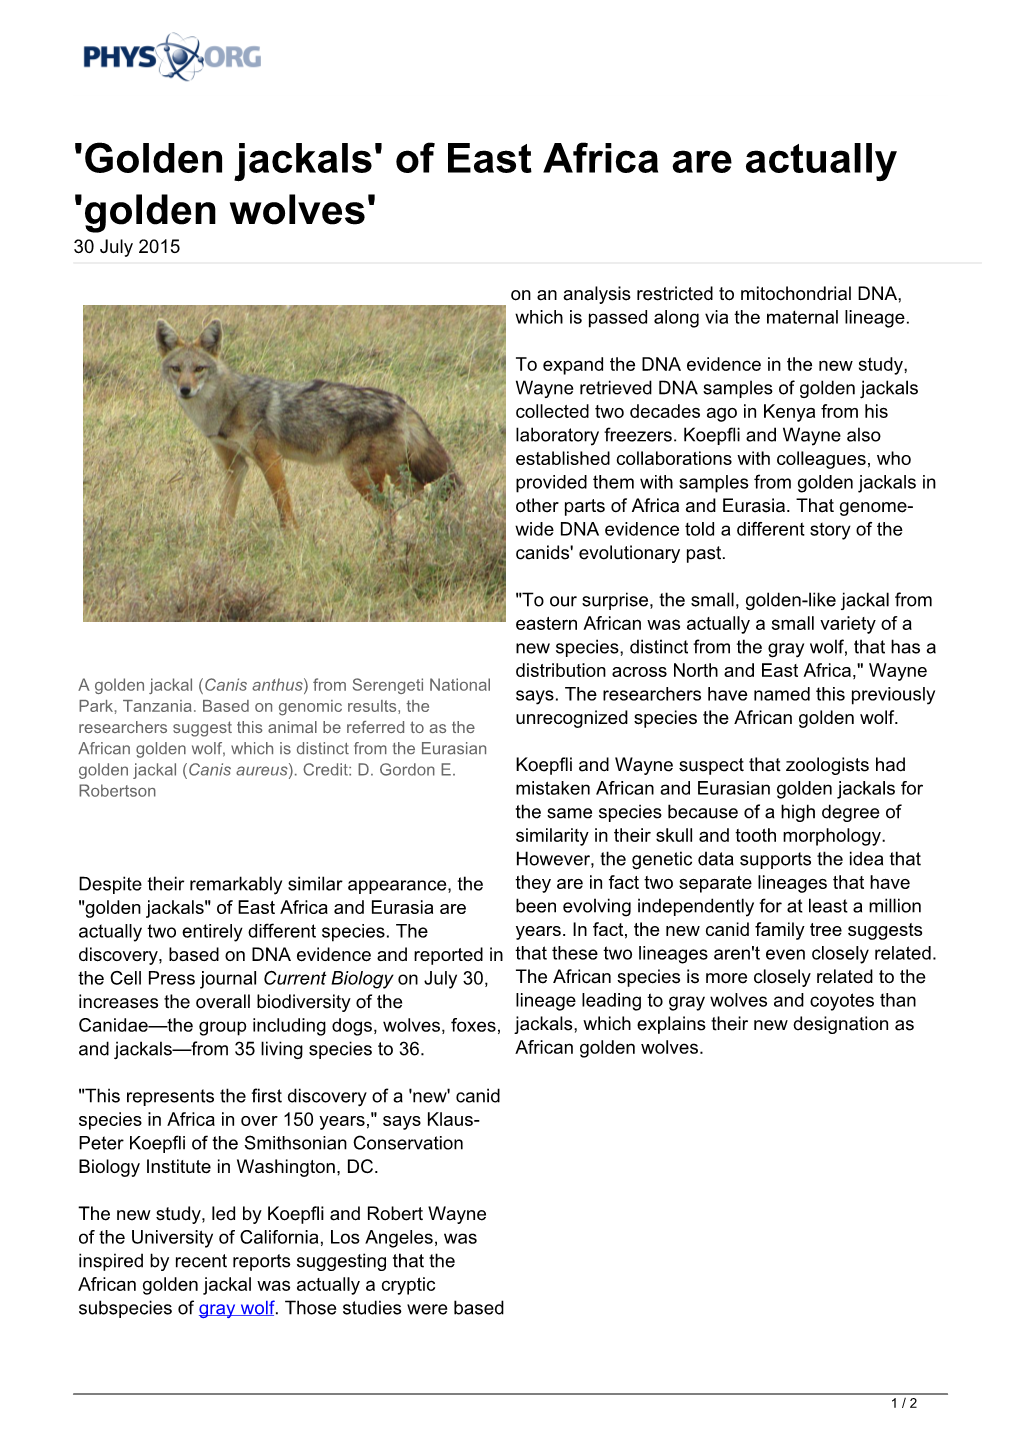 Golden Jackals' of East Africa Are Actually 'Golden Wolves' 30 July 2015